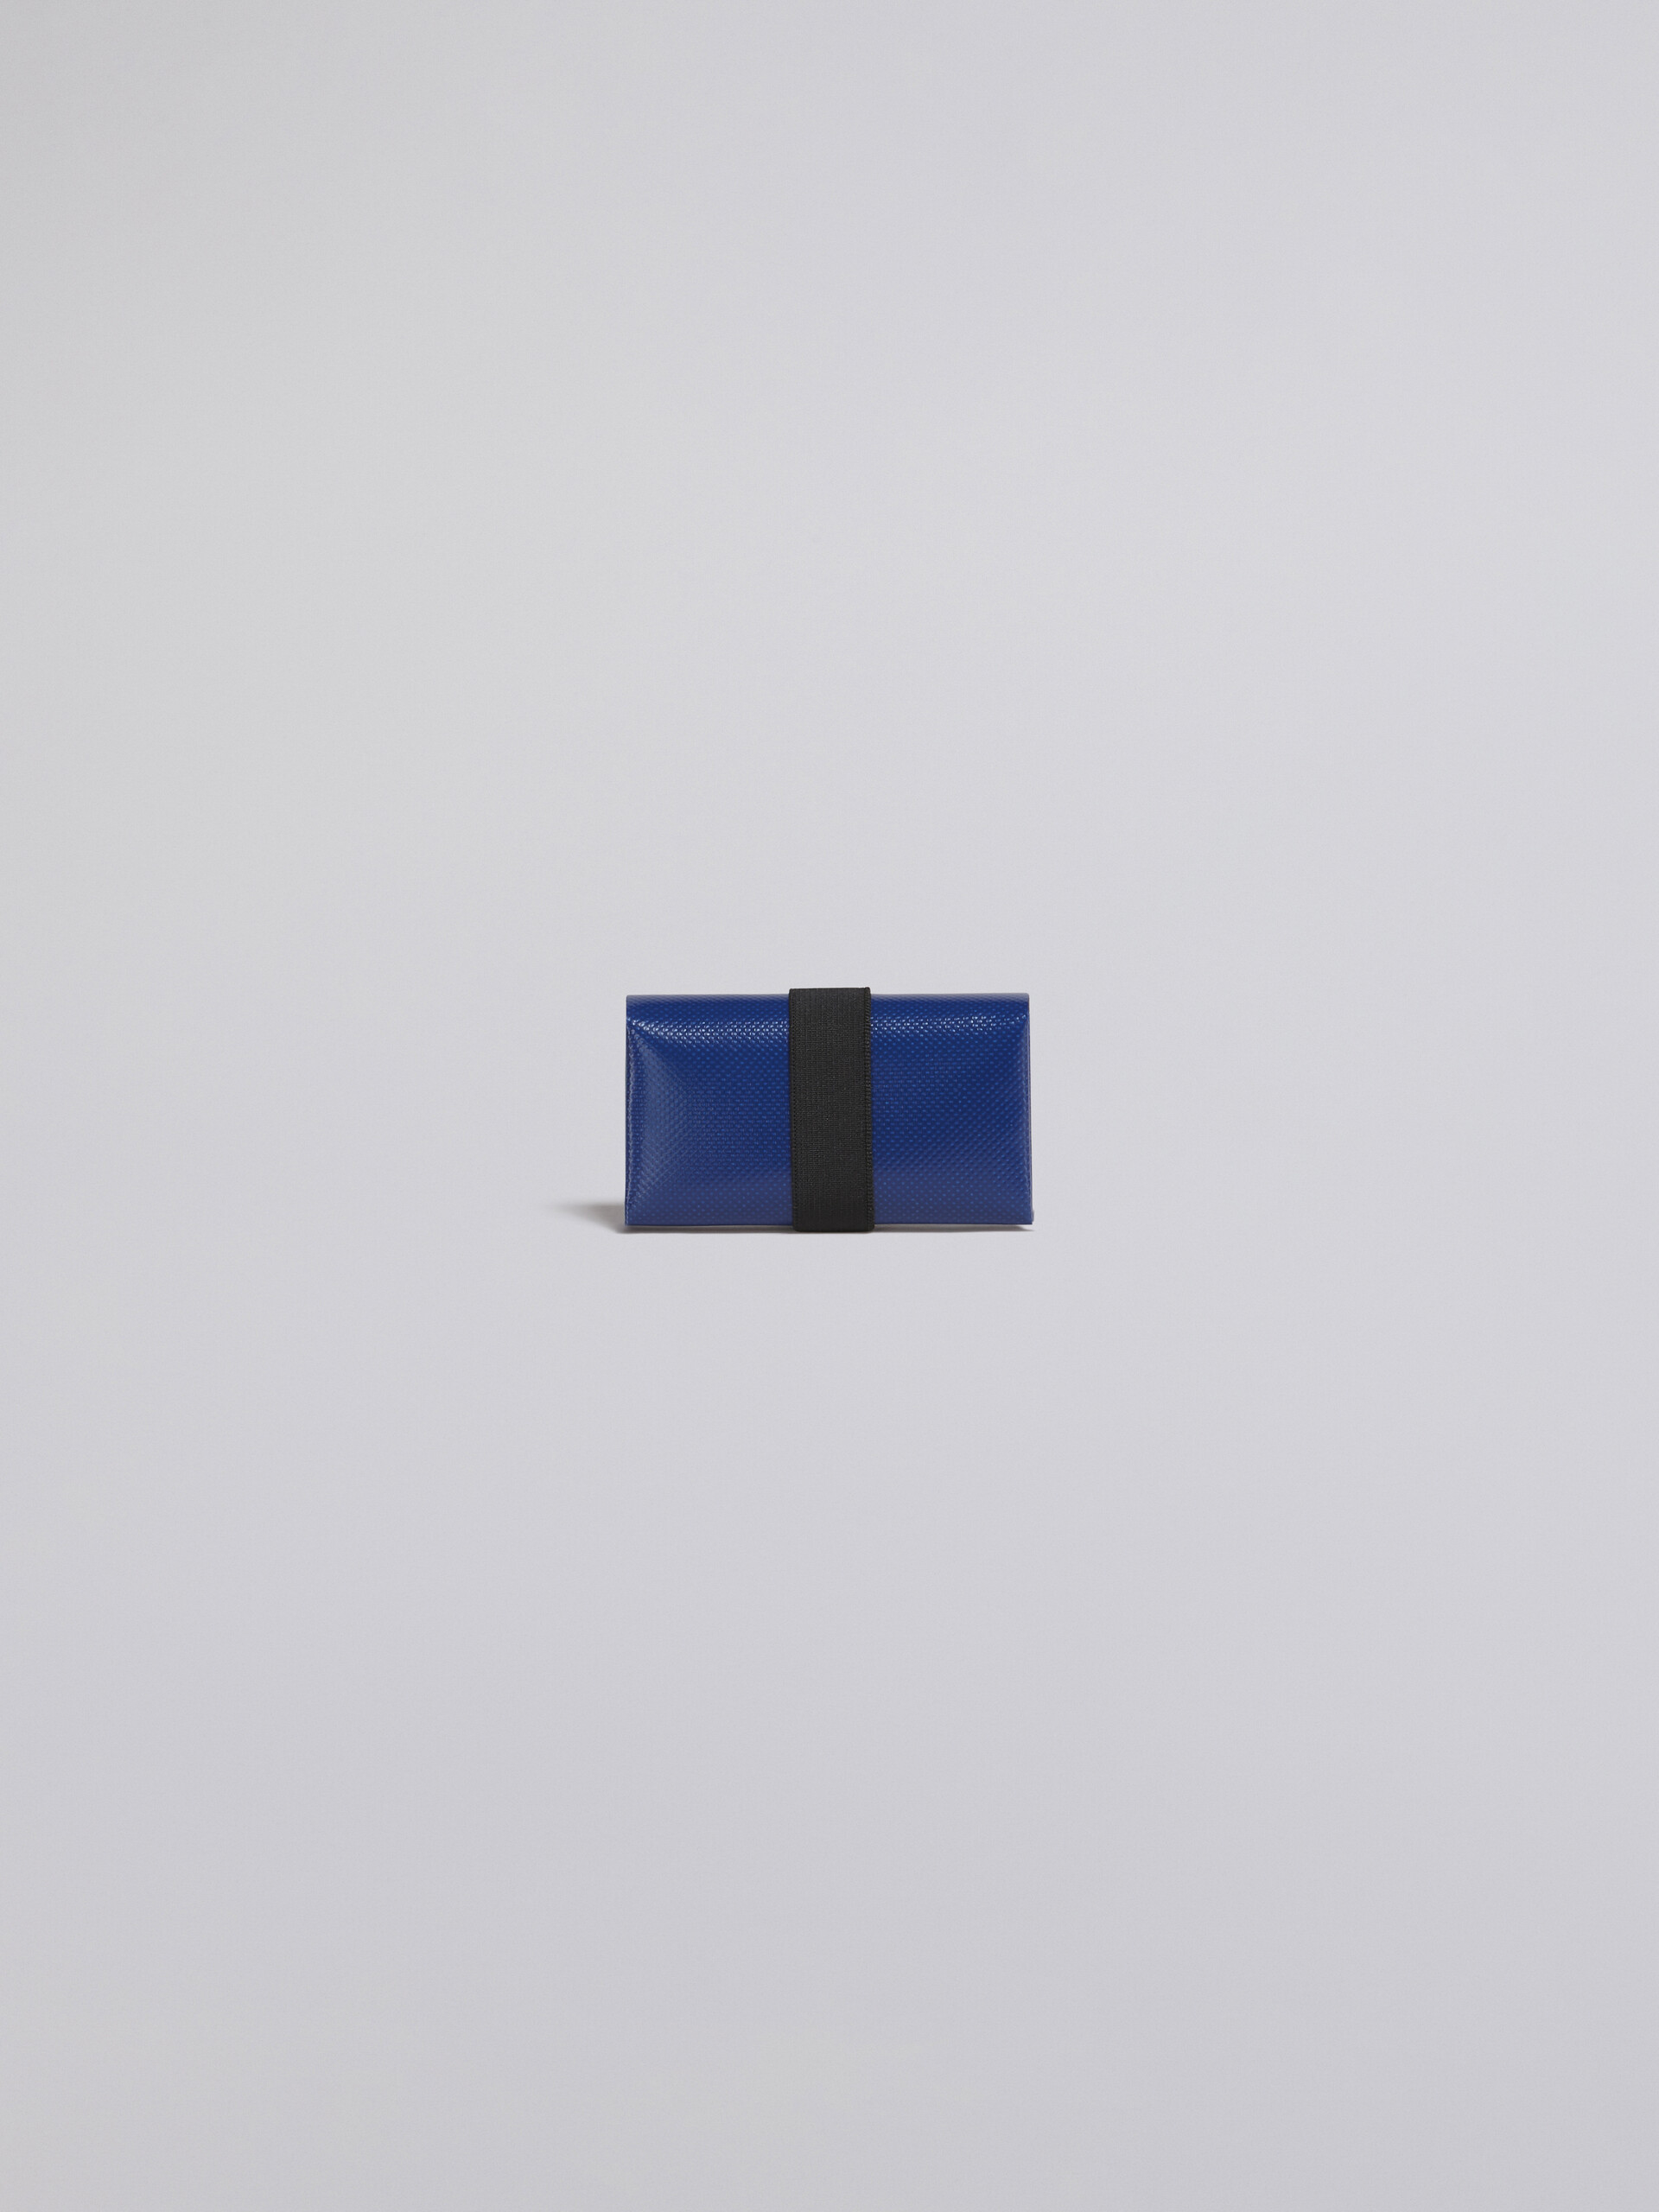 Black and blue origami wallet - Wallets - Image 3